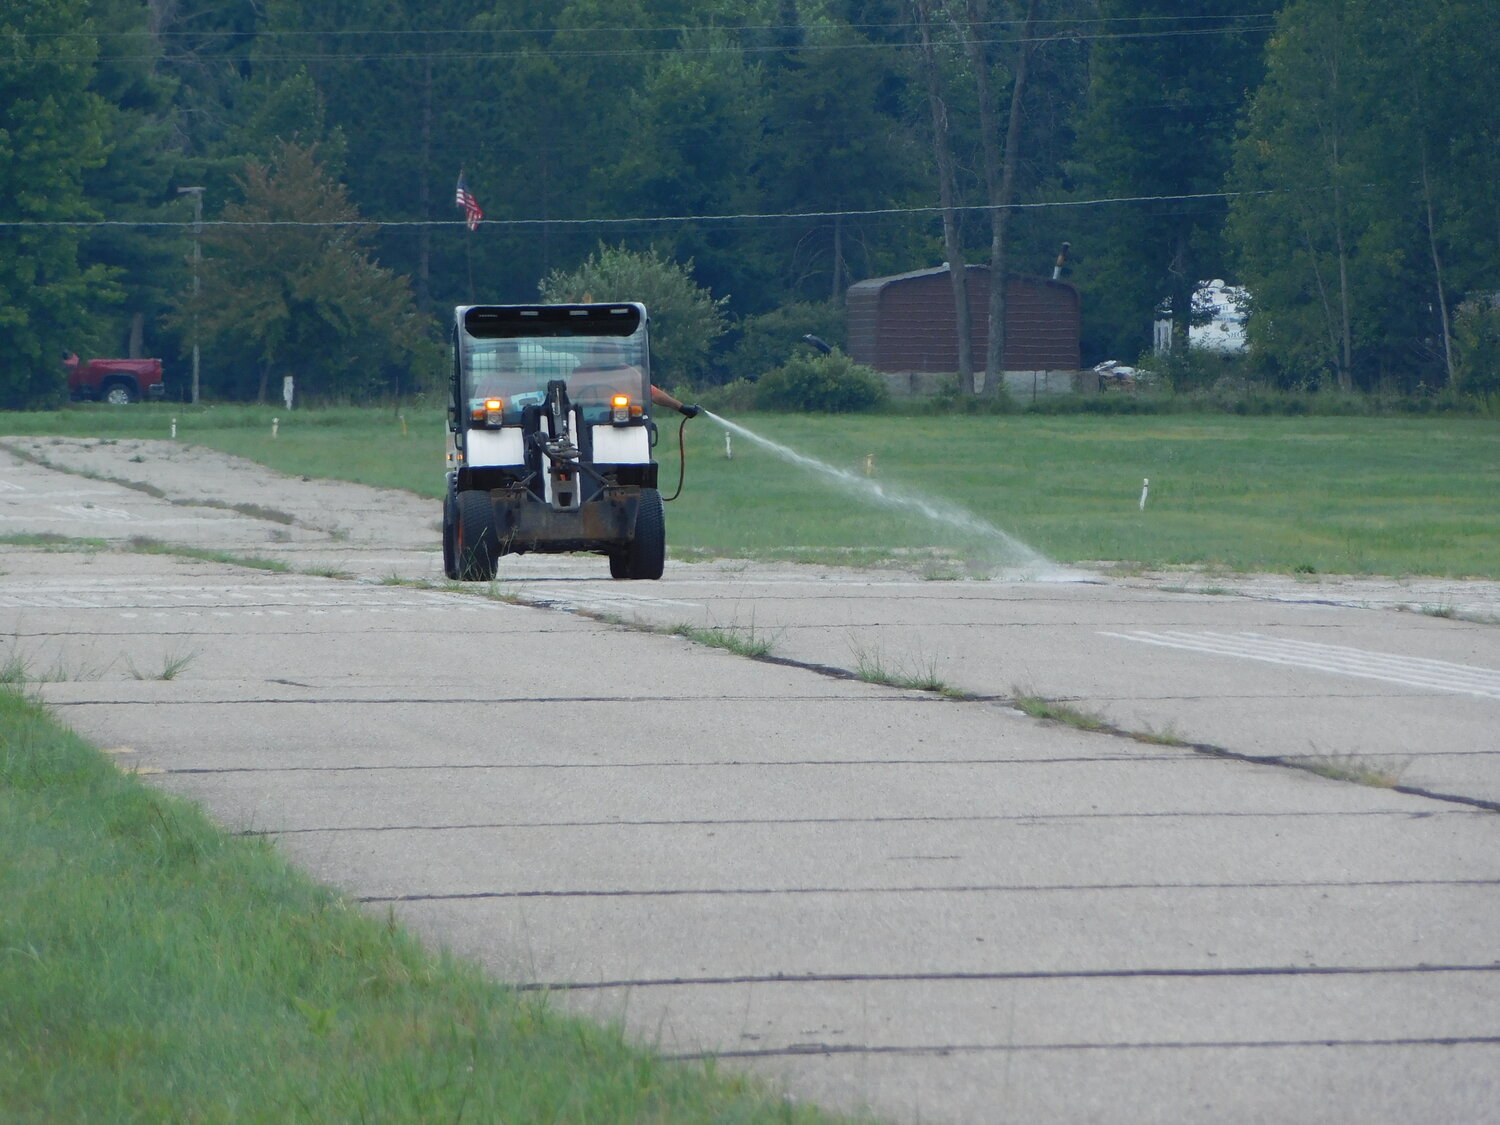 Shown here is a long view of the airport’s paved runway and the Aug. 4 weed spraying.